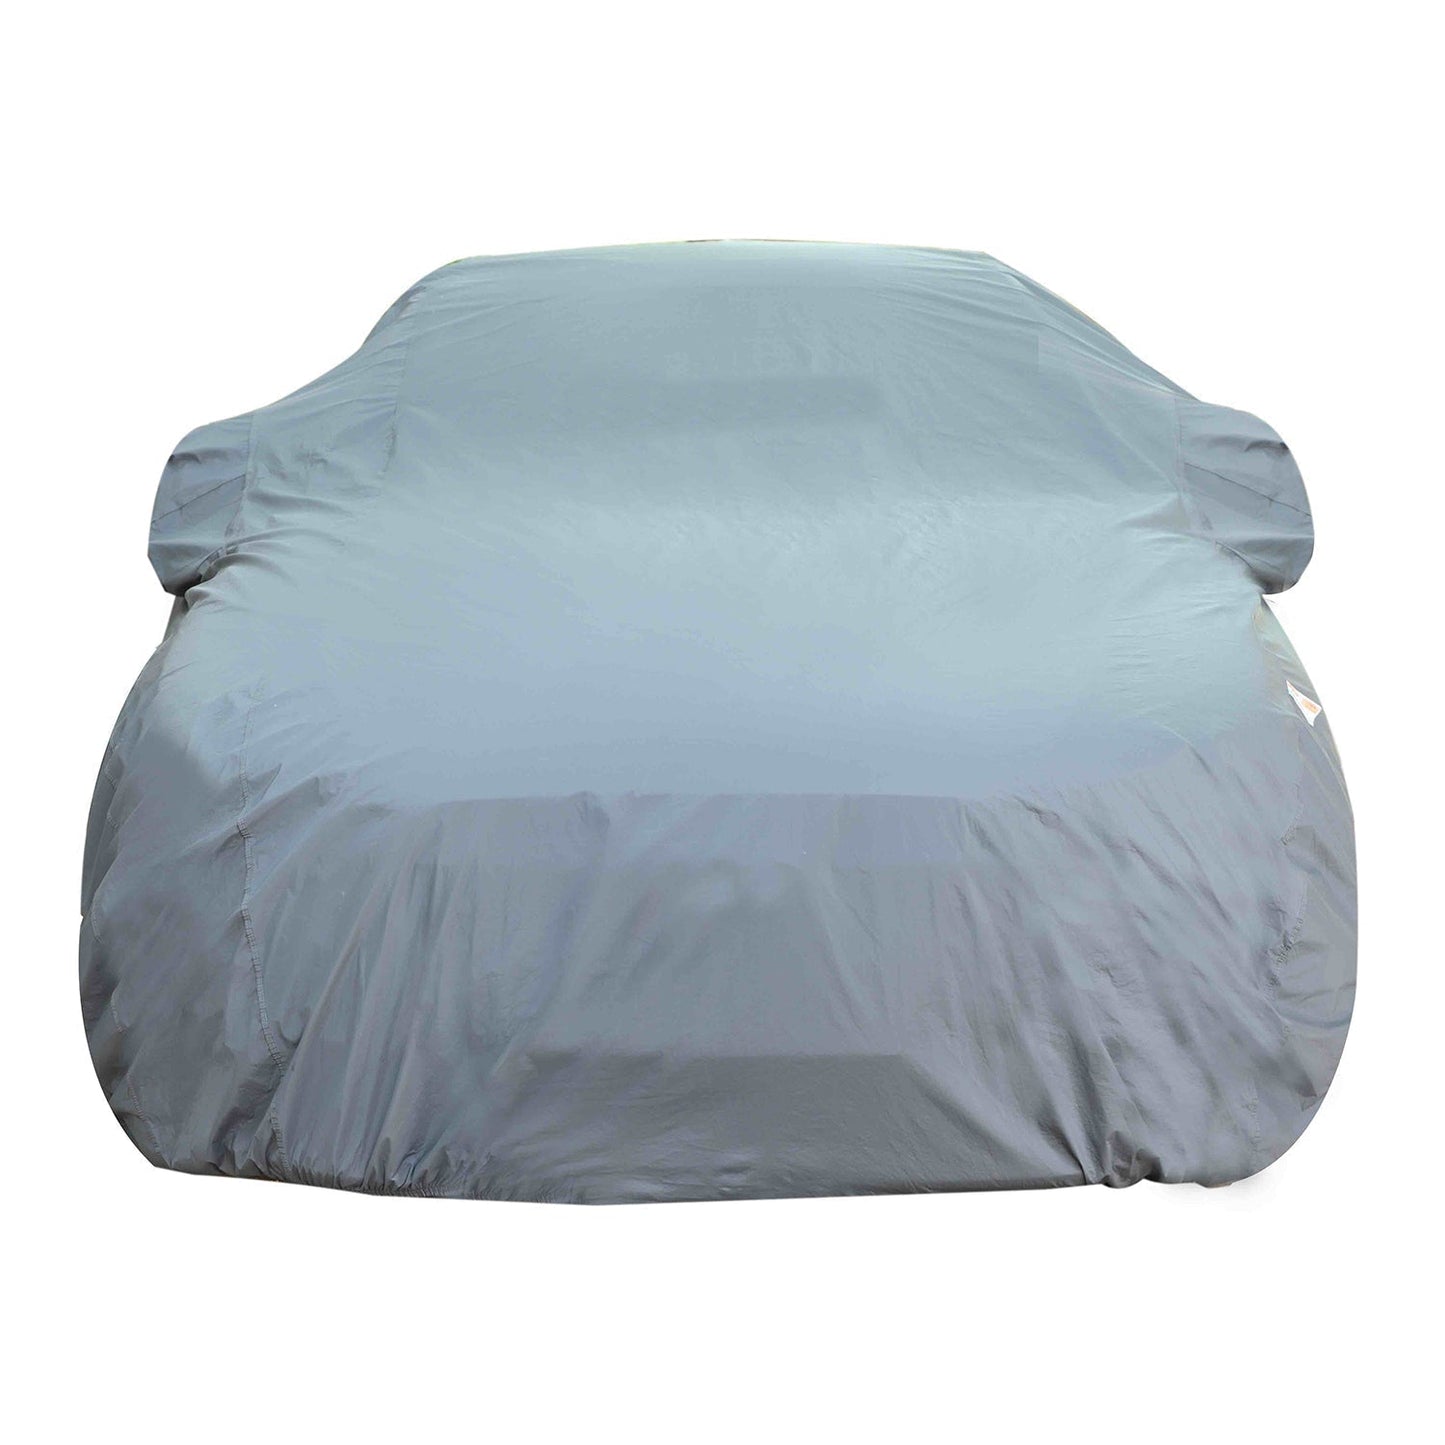 Oshotto Dark Grey 100% Anti Reflective, dustproof and Water Proof Car Body Cover with Mirror Pocket For Mahindra XUV-500